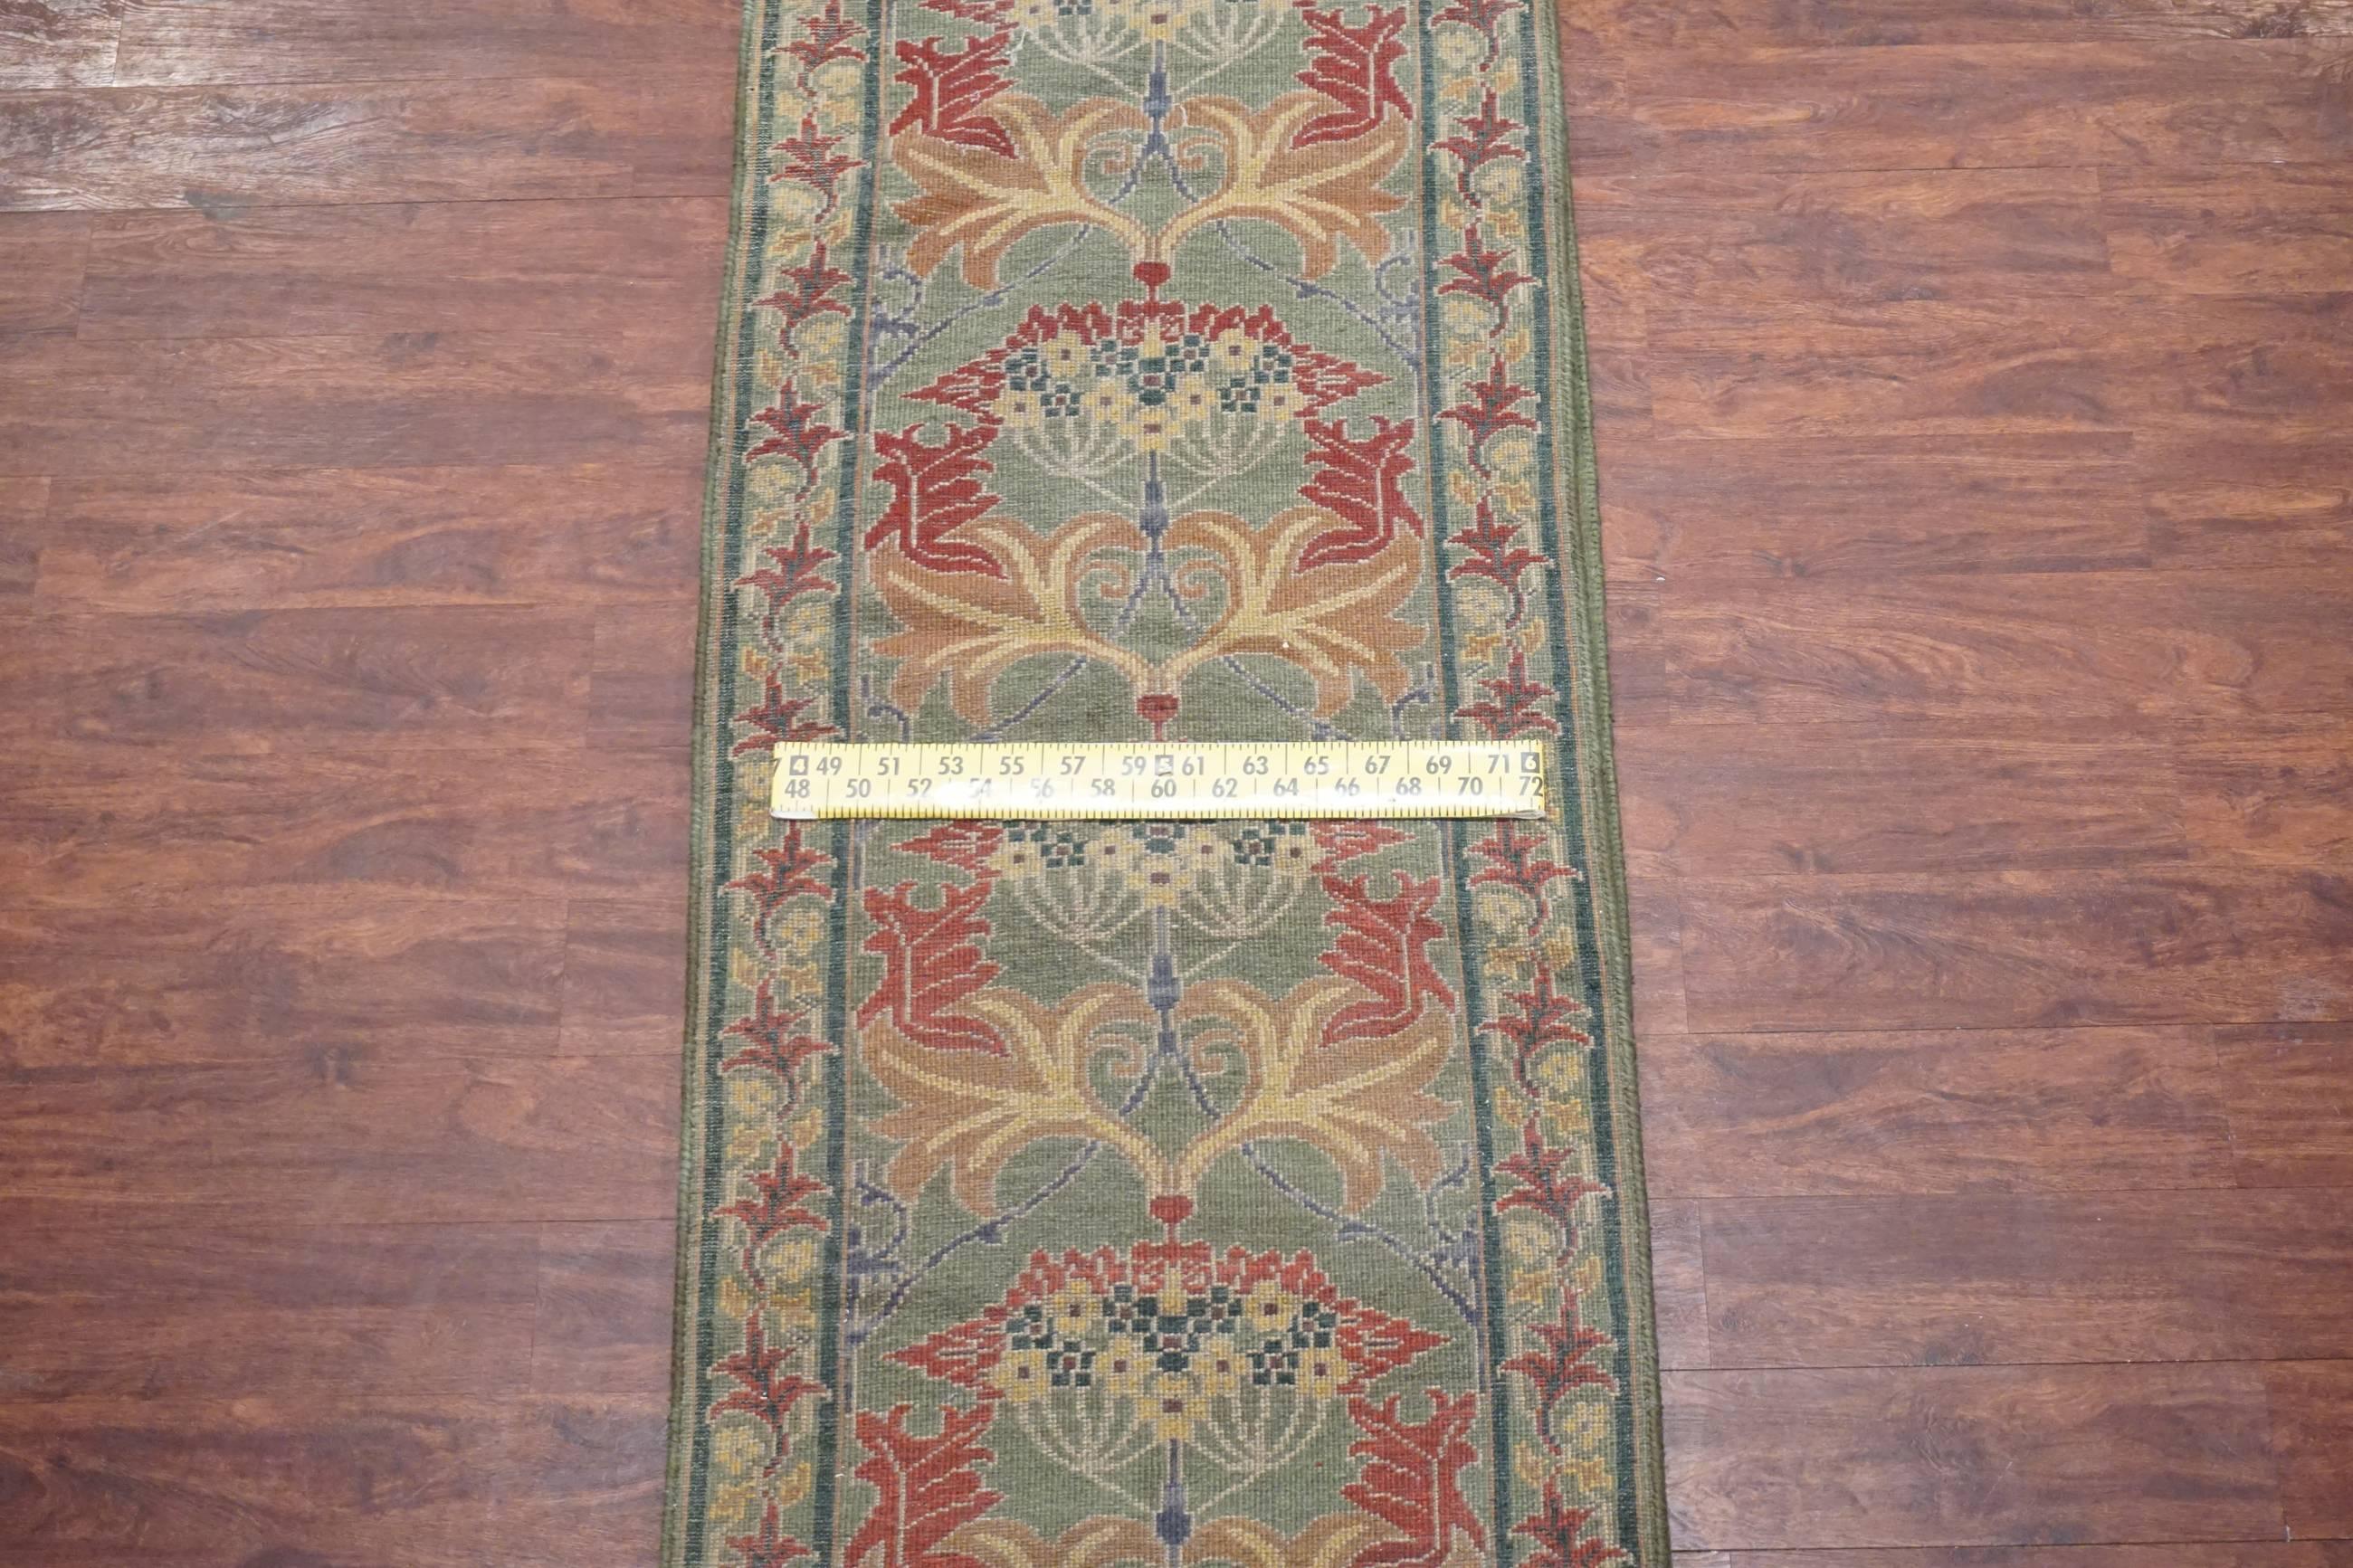 William Morris Art & Craft Hand-Knotted Runner, circa 1990 In Excellent Condition For Sale In Northridge, CA